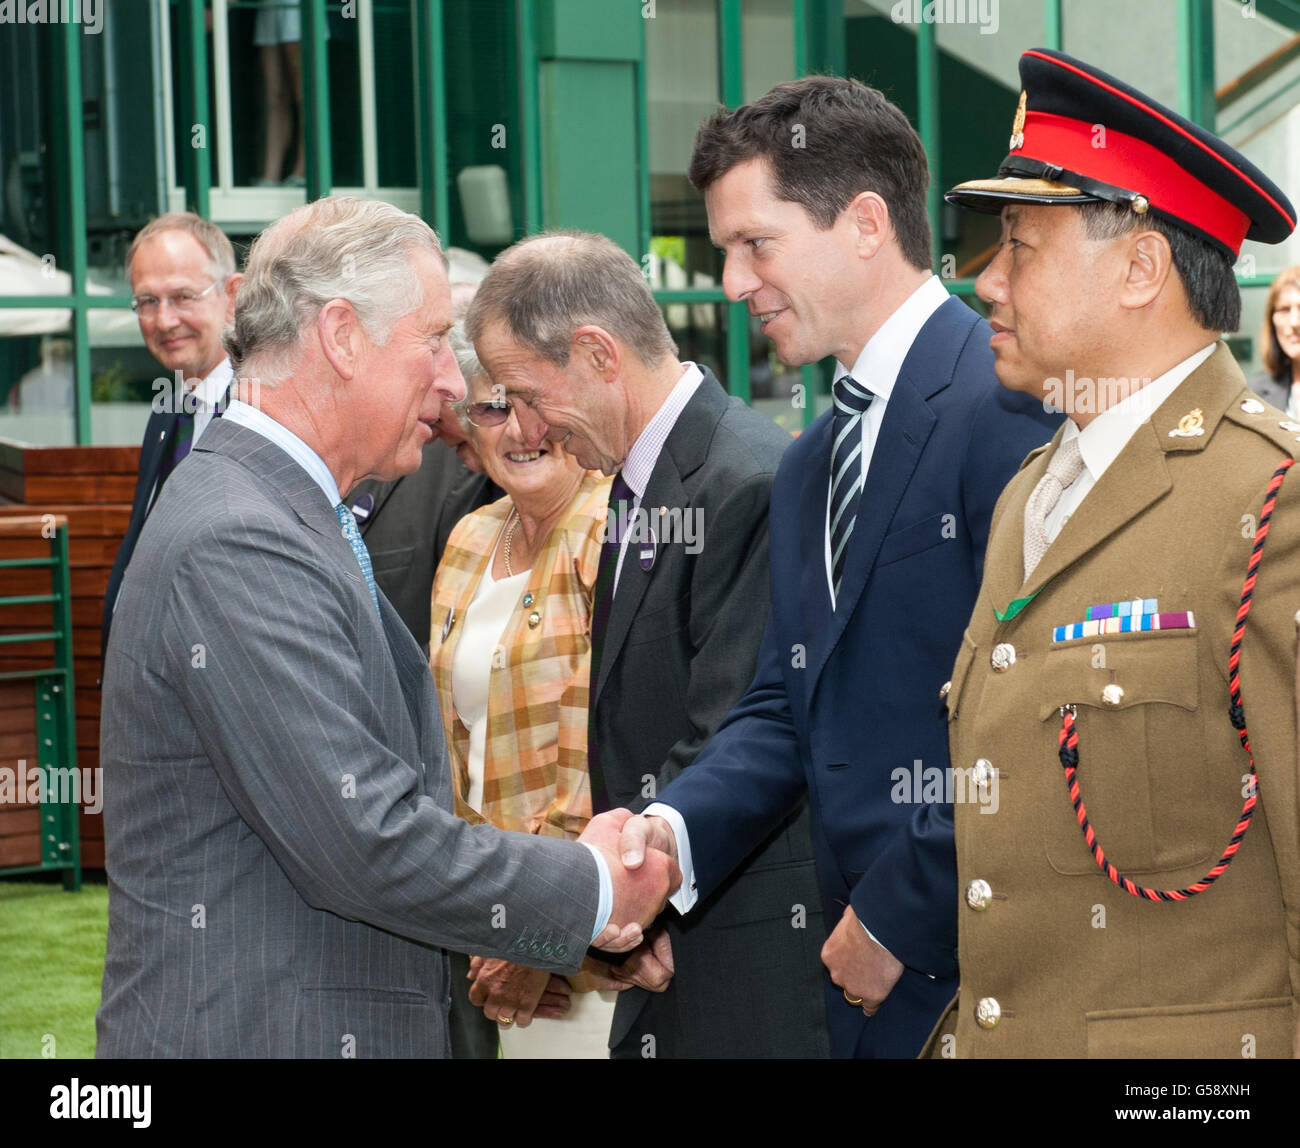 The Prince of Wales (left) meets Tim Henman on day three of the 2012 Wimbledon Championships, at the All England Lawn Tennis Club, Wimbledon, London. Stock Photo